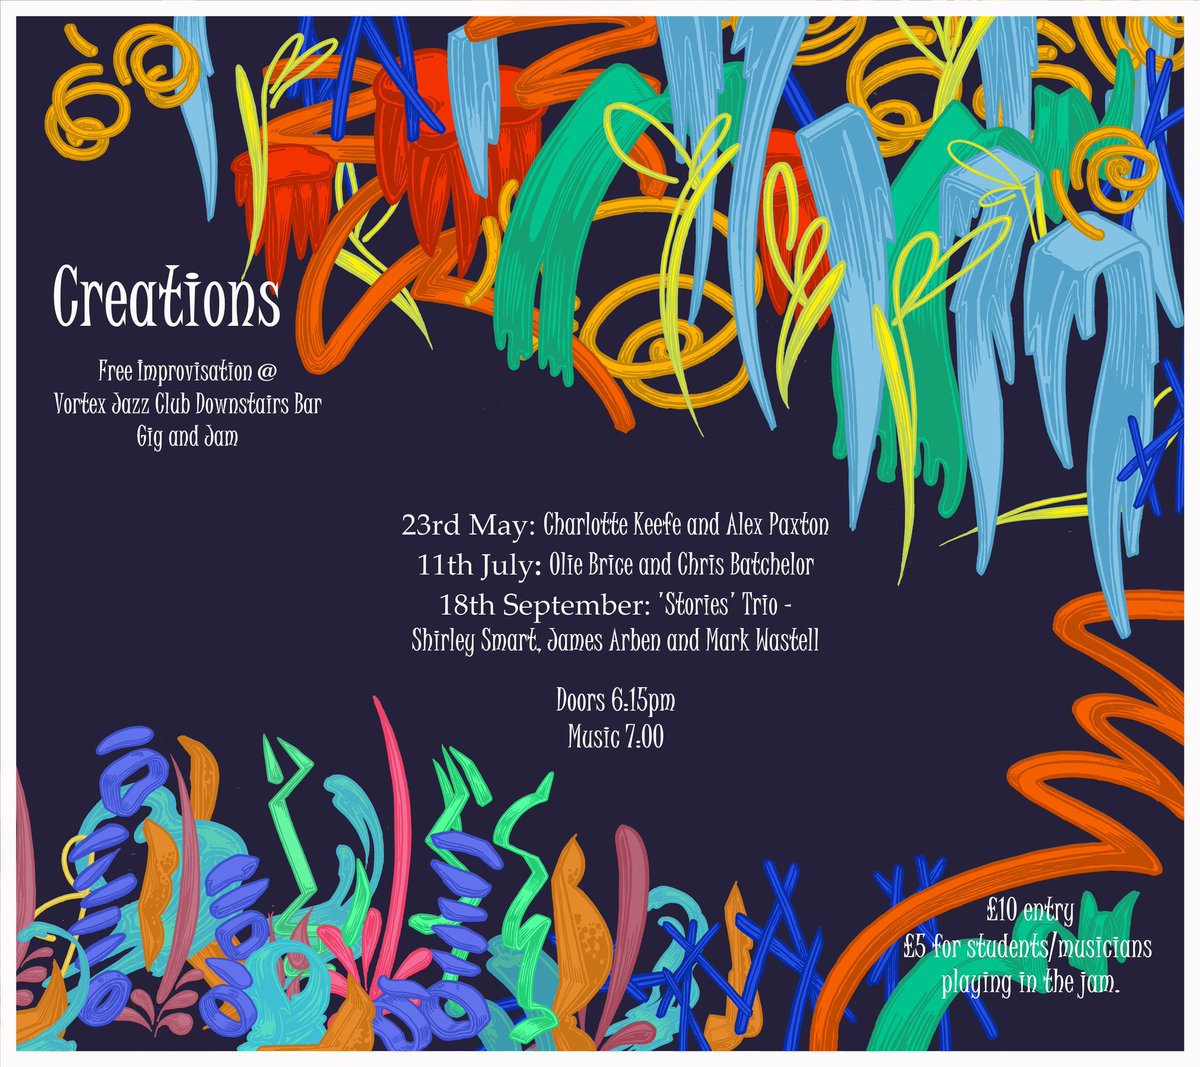 Creations Free Improv returns @vortexjazz on 23rd May! Featured artists @charlottekeeffe @alexpaxtonyeah Them an open acoustic jam session of free improvised small groups. Join us there ❤️🎶🦚🦋❤️🎶🦋🎶❤️🦚